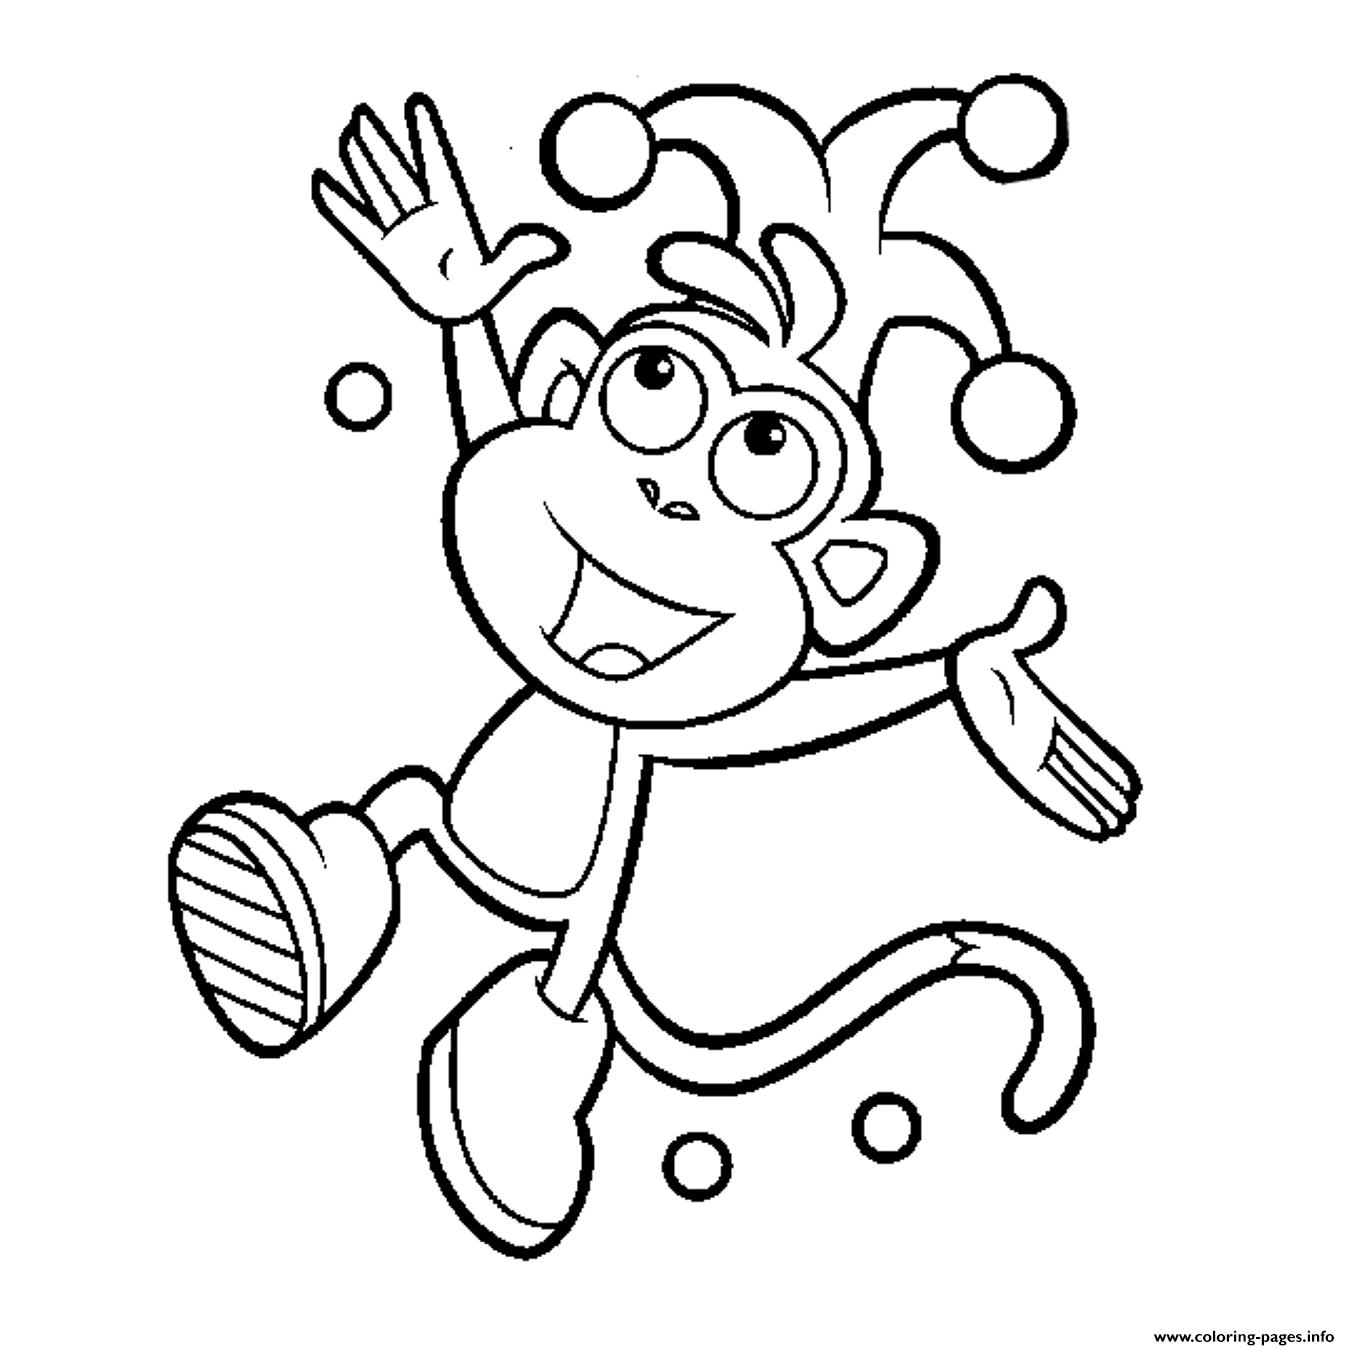 Boots Of Dora Printable S1d44 coloring pages